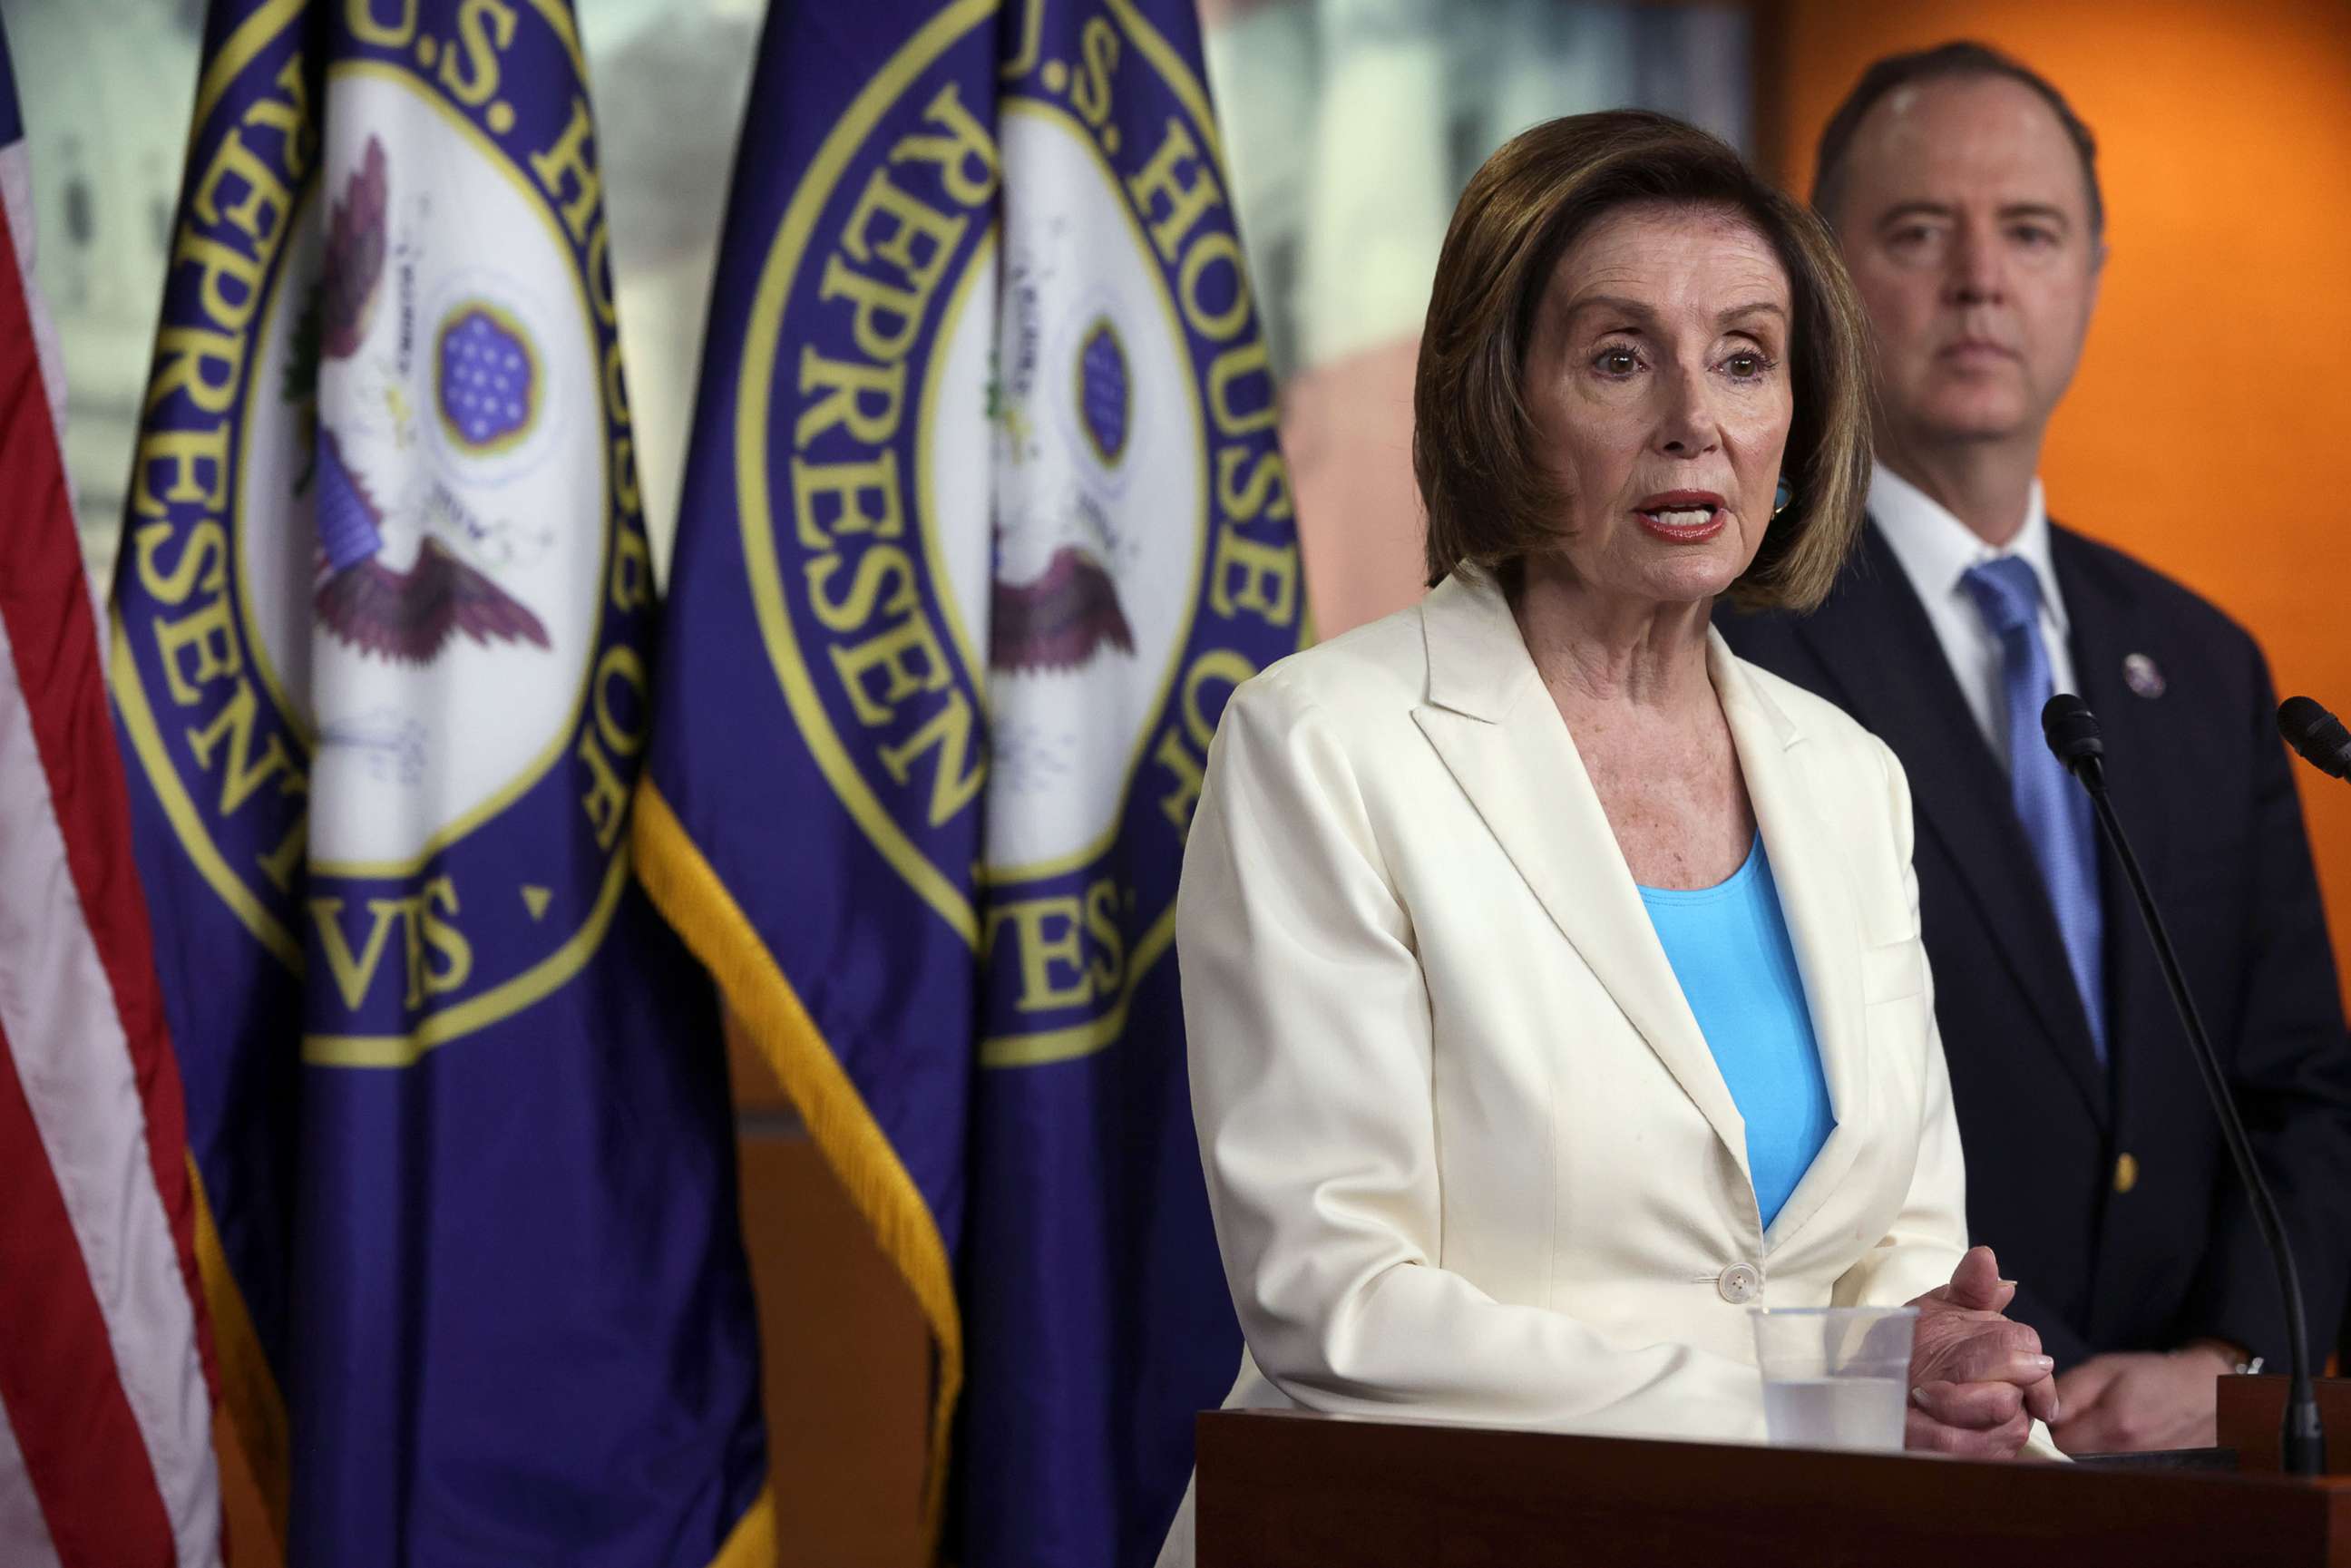 PHOTO: Speaker of the House Rep. Nancy Pelosi speaks with Rep. Adam Schiff during a weekly news conference at the U.S. Capitol, July 1, 2021, in Washington, D.C.